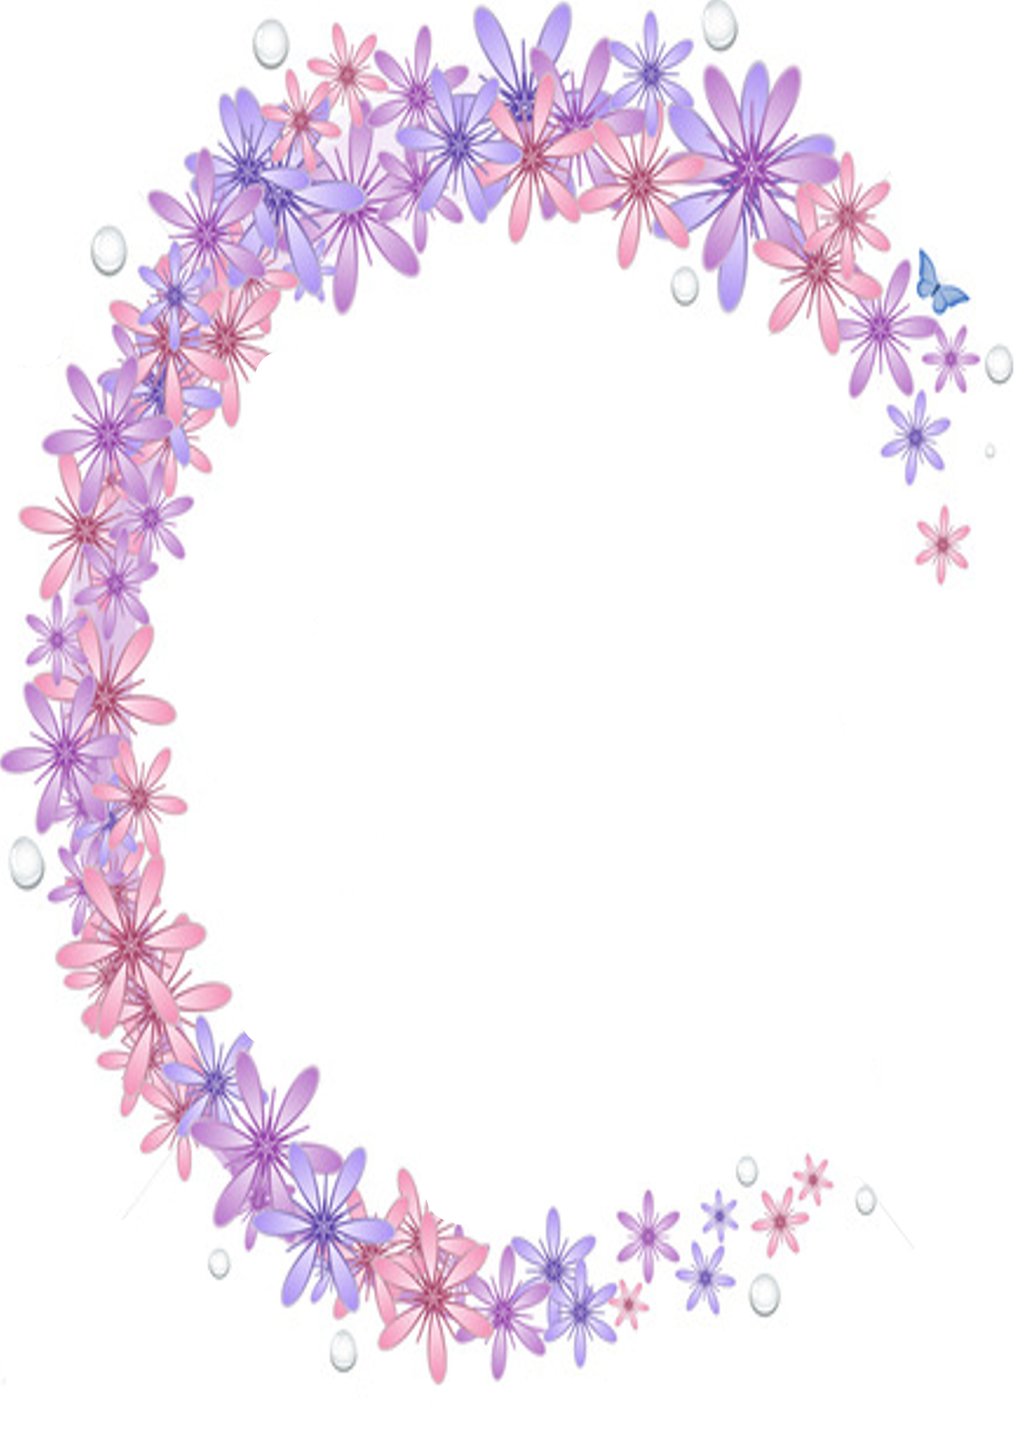 Pretty Flowers Border by KirstyLouiseWilson on Clipart library